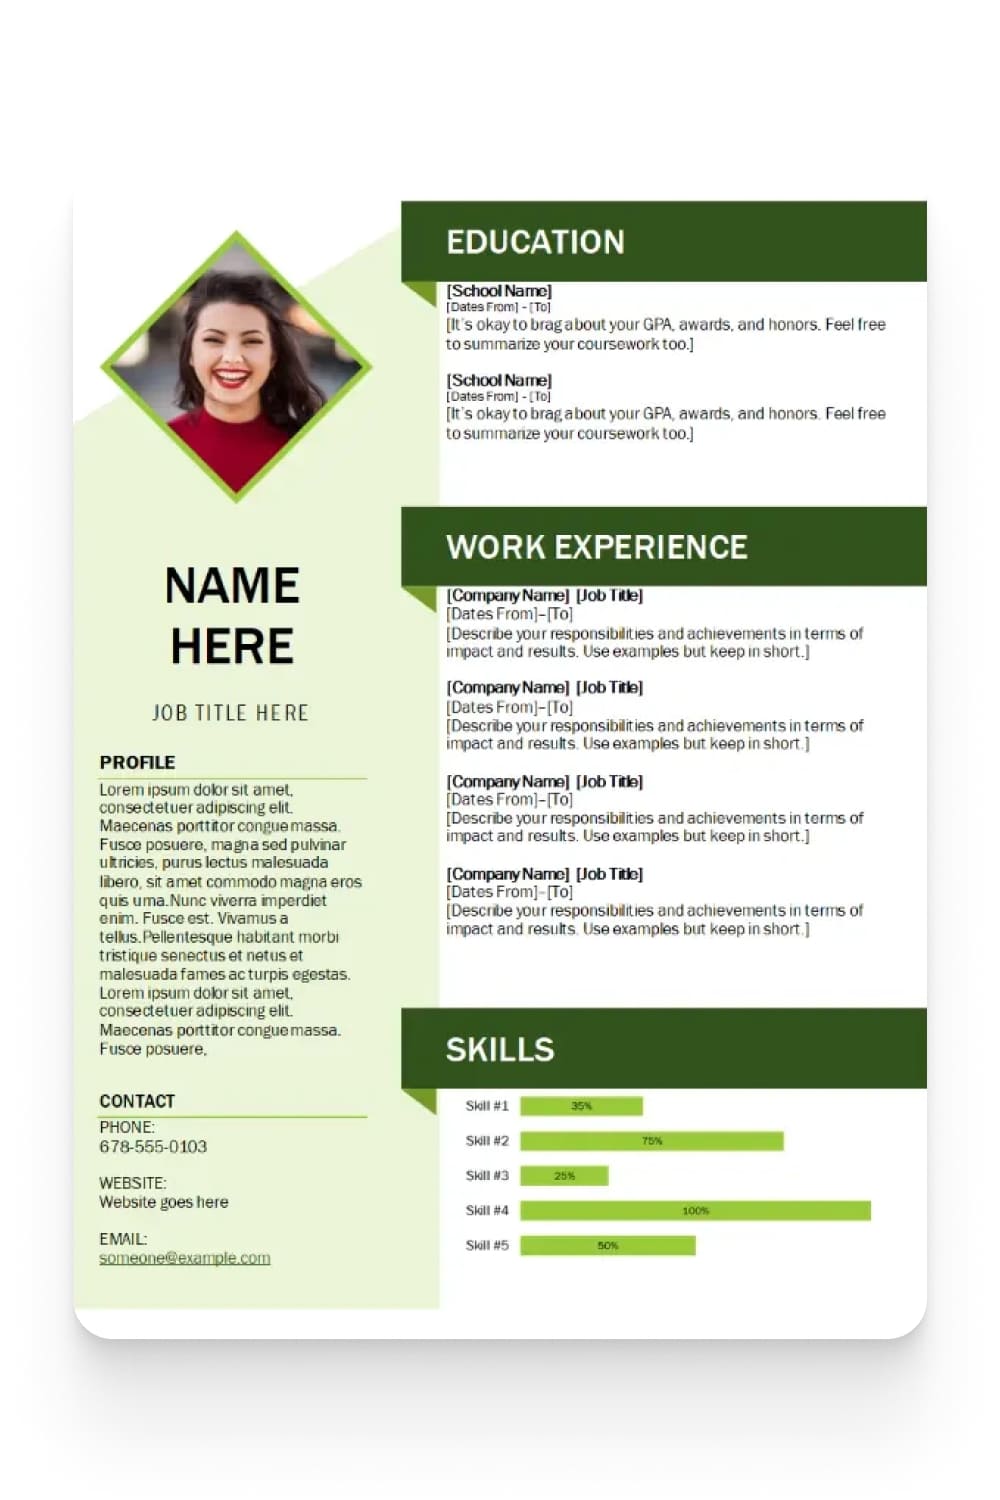 Two-column resume with green decoration.